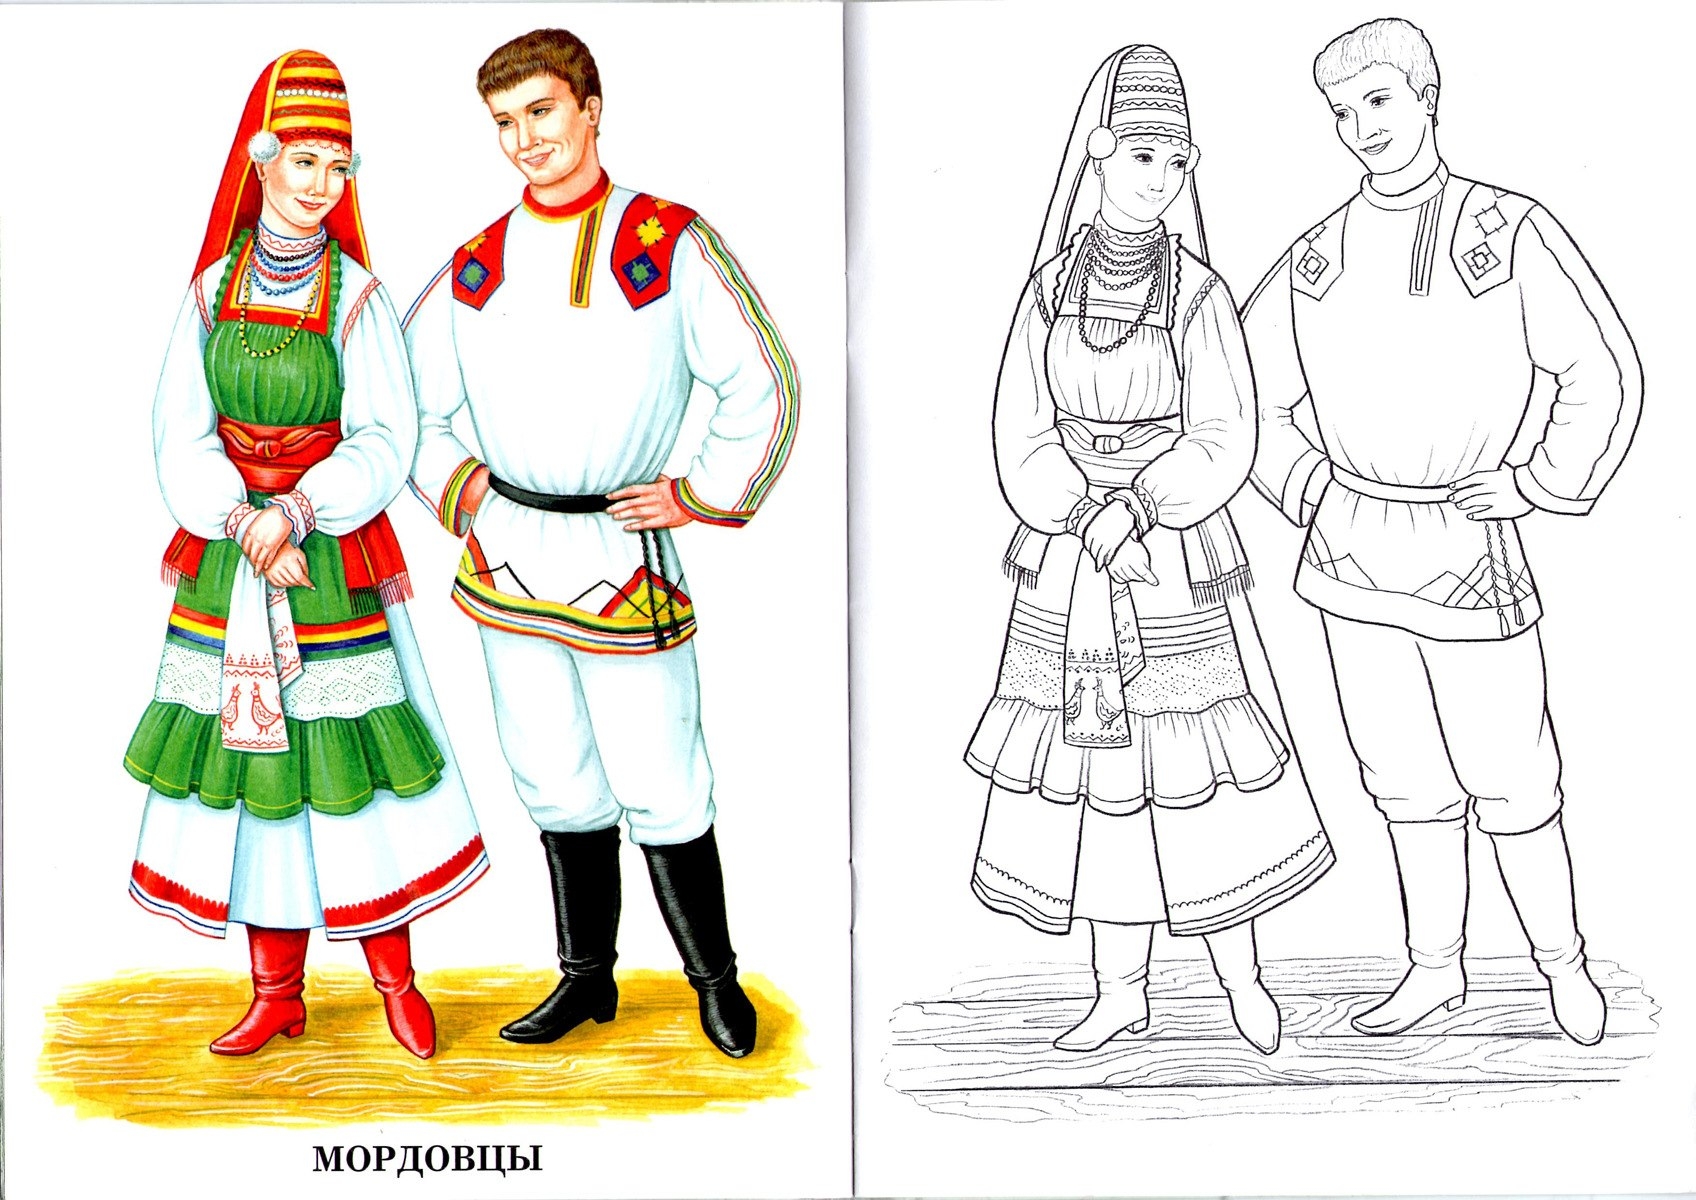 Coloring page for a lively Cossack costume